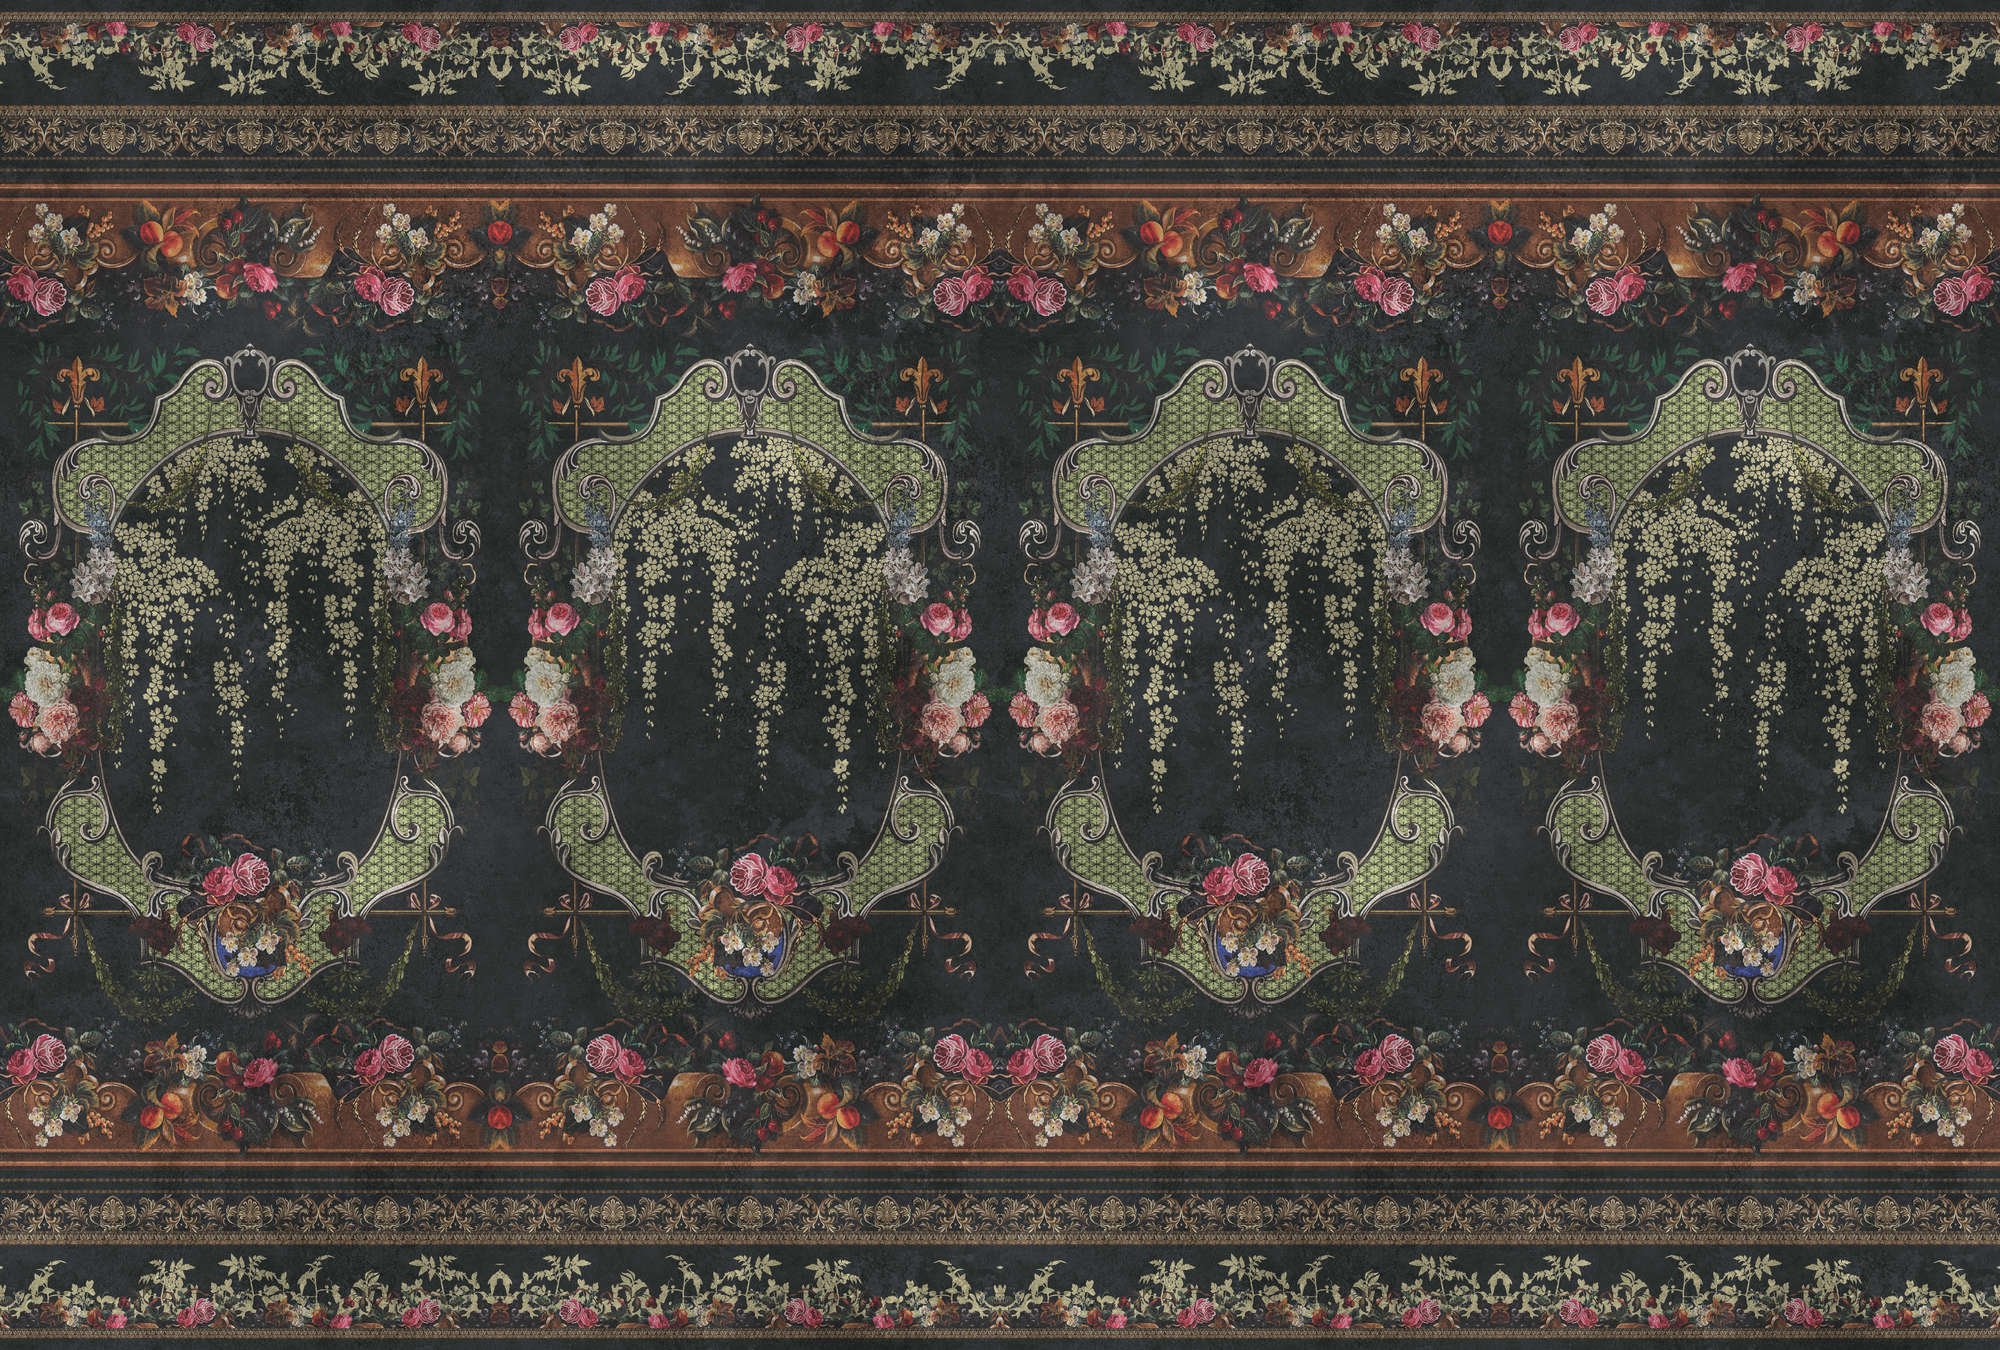             Photo wallpaper »babette« - Ornamental panelling with floral design on vintage plaster texture - red, dark blue | Smooth, slightly pearlescent non-woven fabric
        